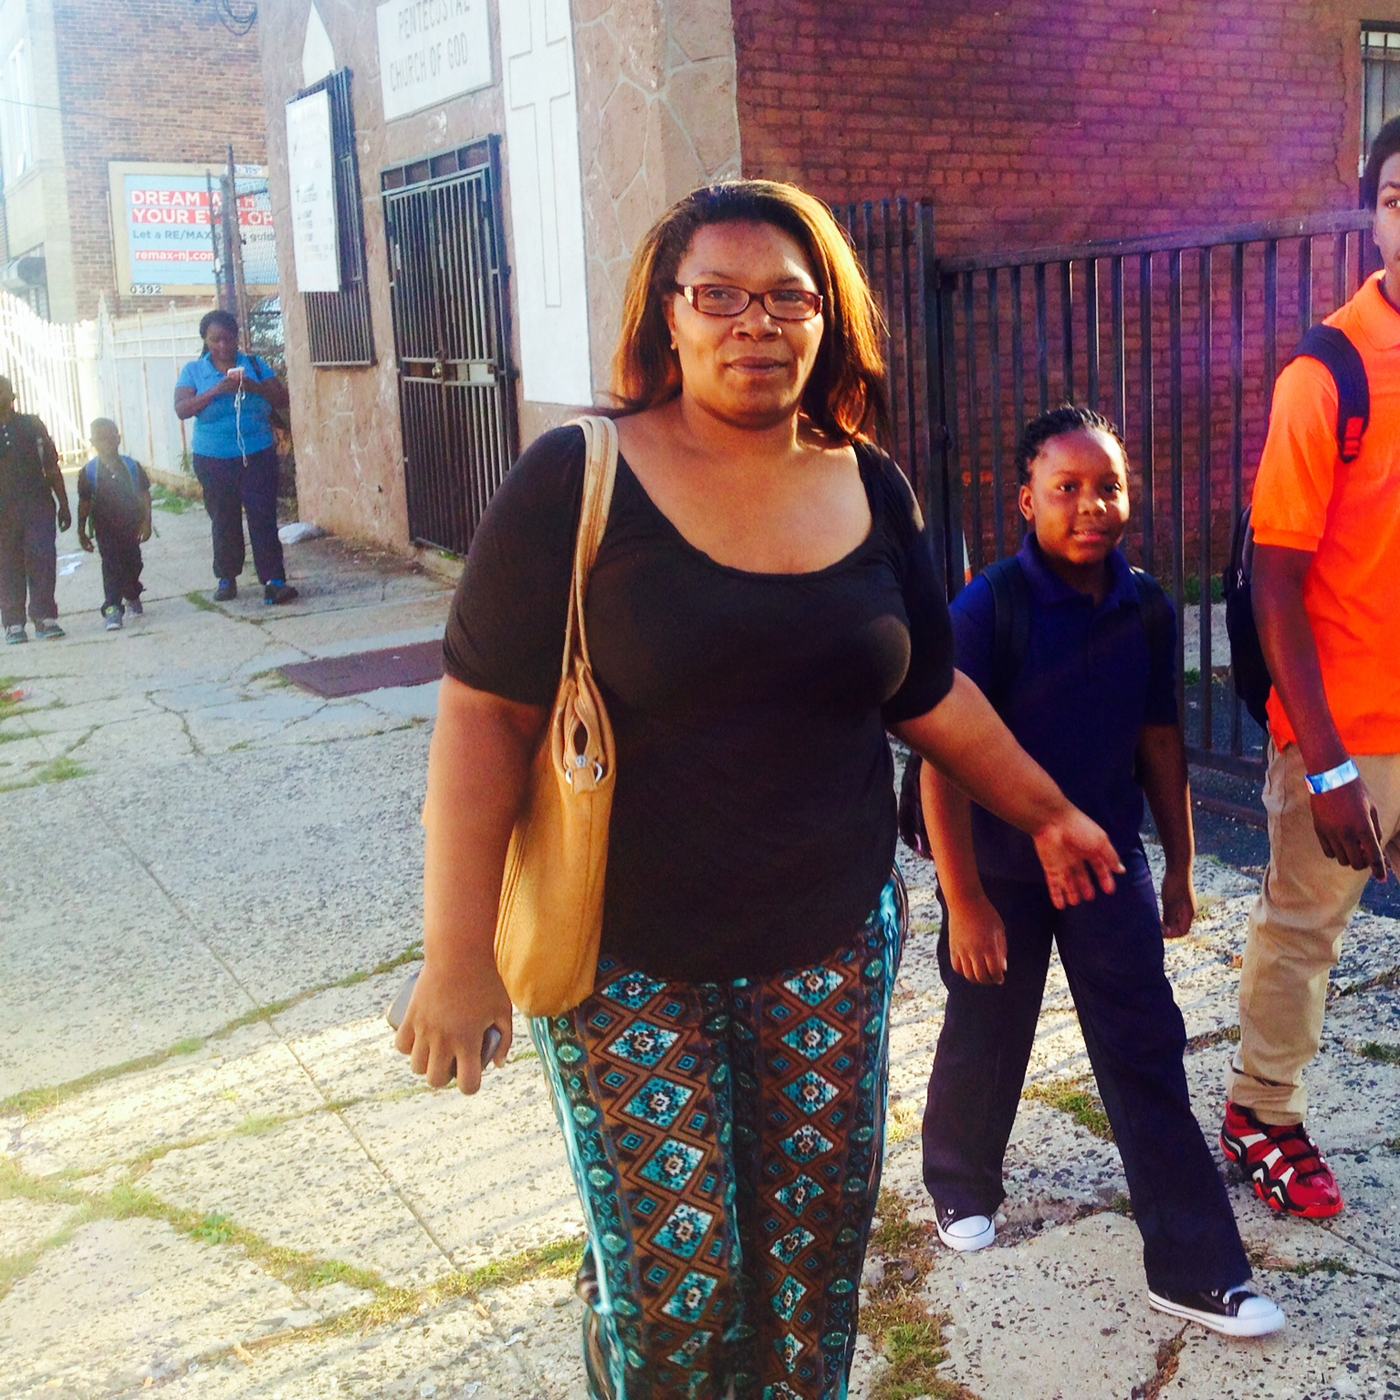 First Day in Newark: Nearly Empty School Buses, Parents Ignoring
Assignments